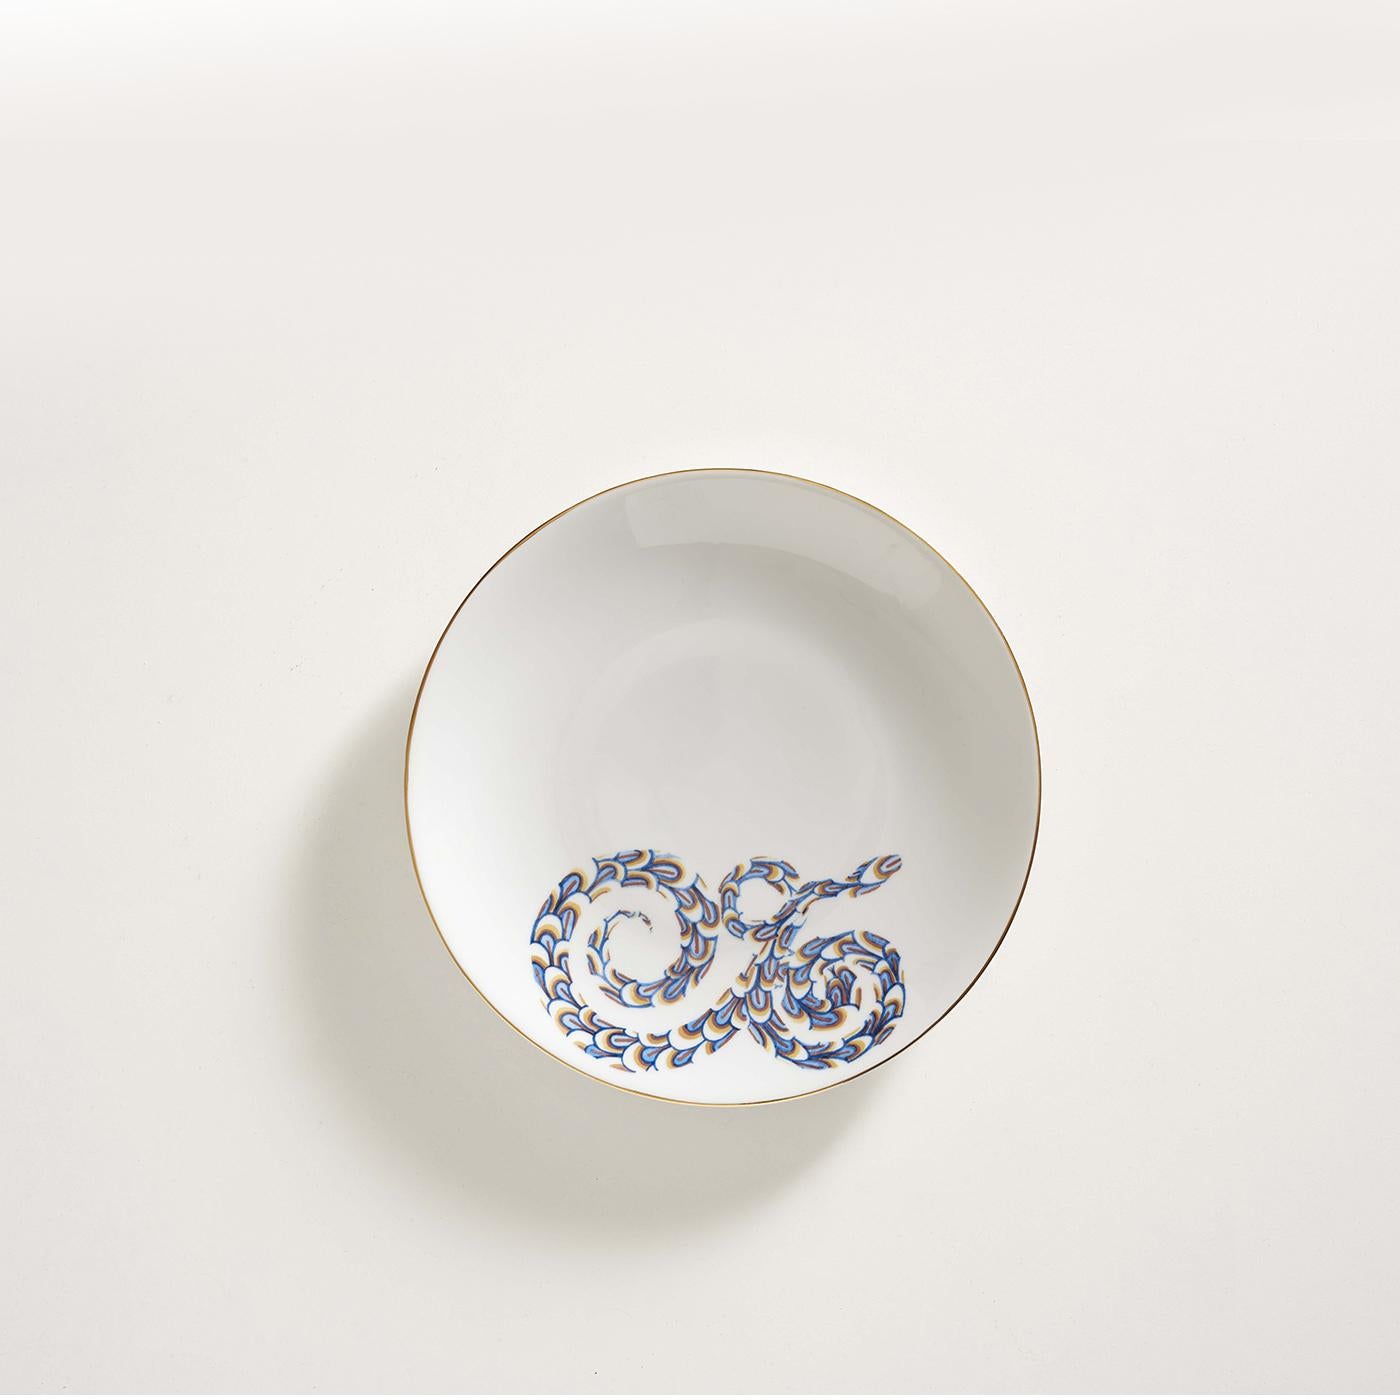 This superb set of dishes is made of one dinner plate, one soup plate, and one dessert plate. Each piece is designed and made in Italy using the finest Limoges porcelain. The decorations are based on hand-painted watercolors and depict a snake